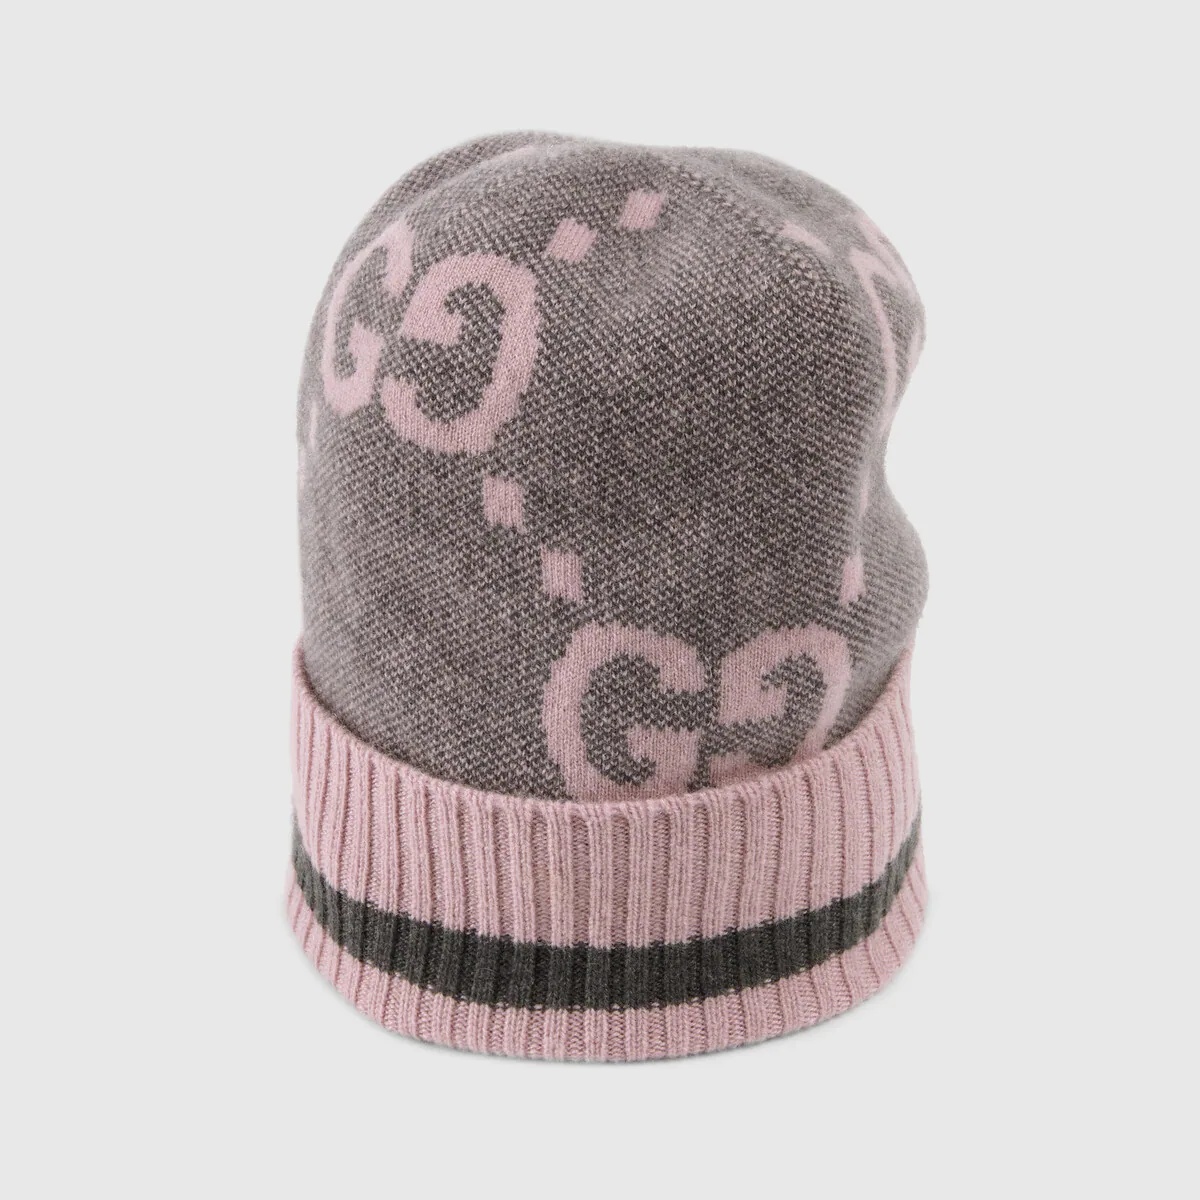 GG knit cashmere hat - 1